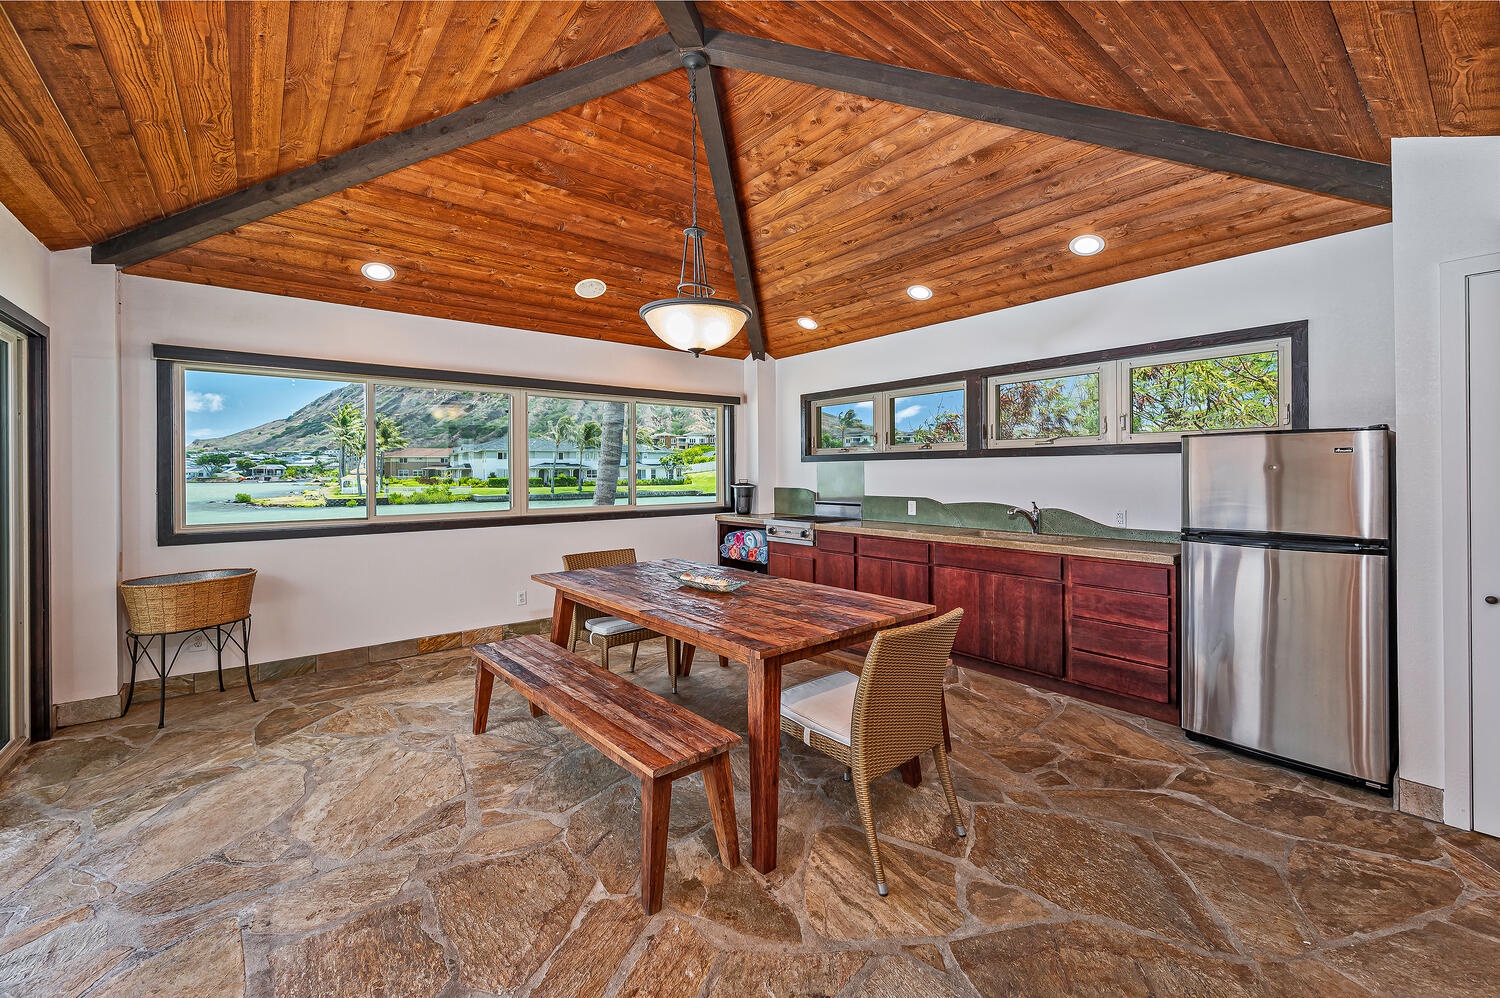 Honolulu Vacation Rentals, Nani Wai - Enclosed patio space perfect for indoor/outdoor dining